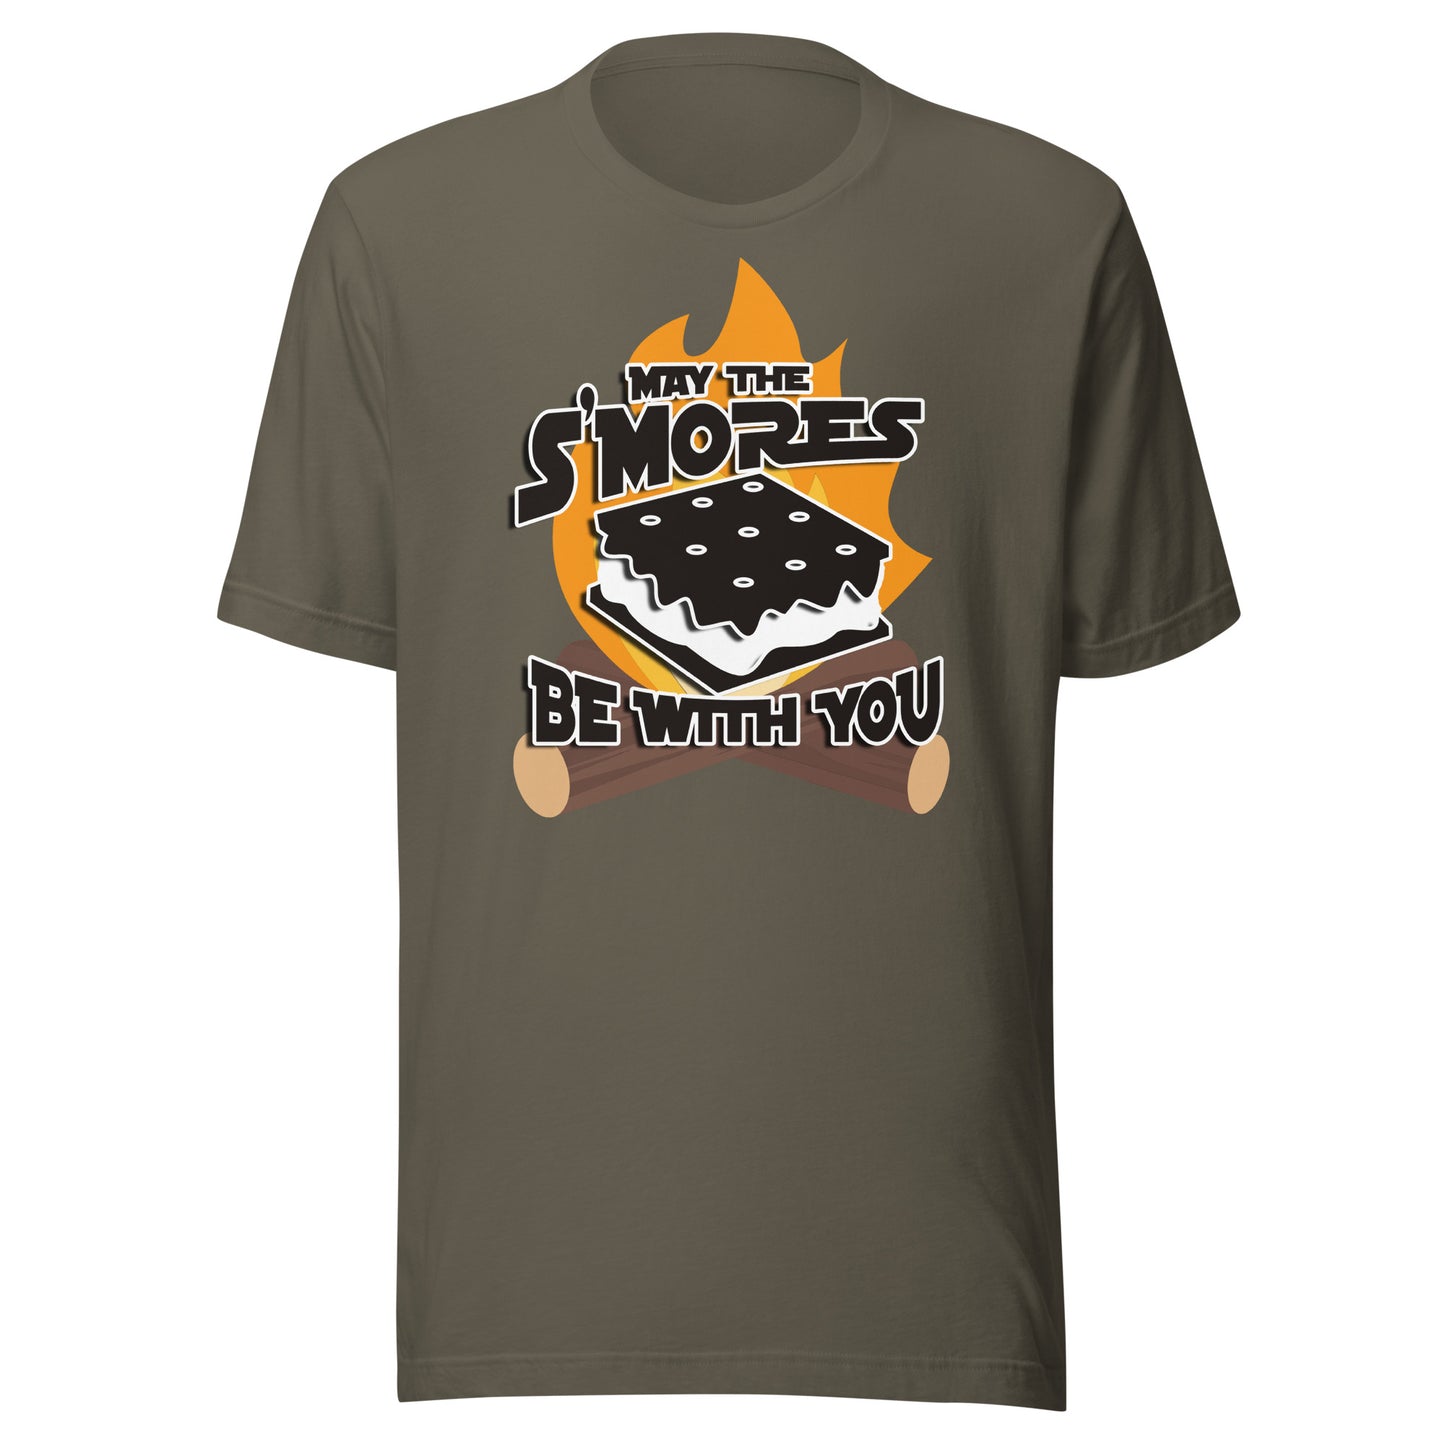 May the S'mores be with you funny camping smores campfire T Shirt